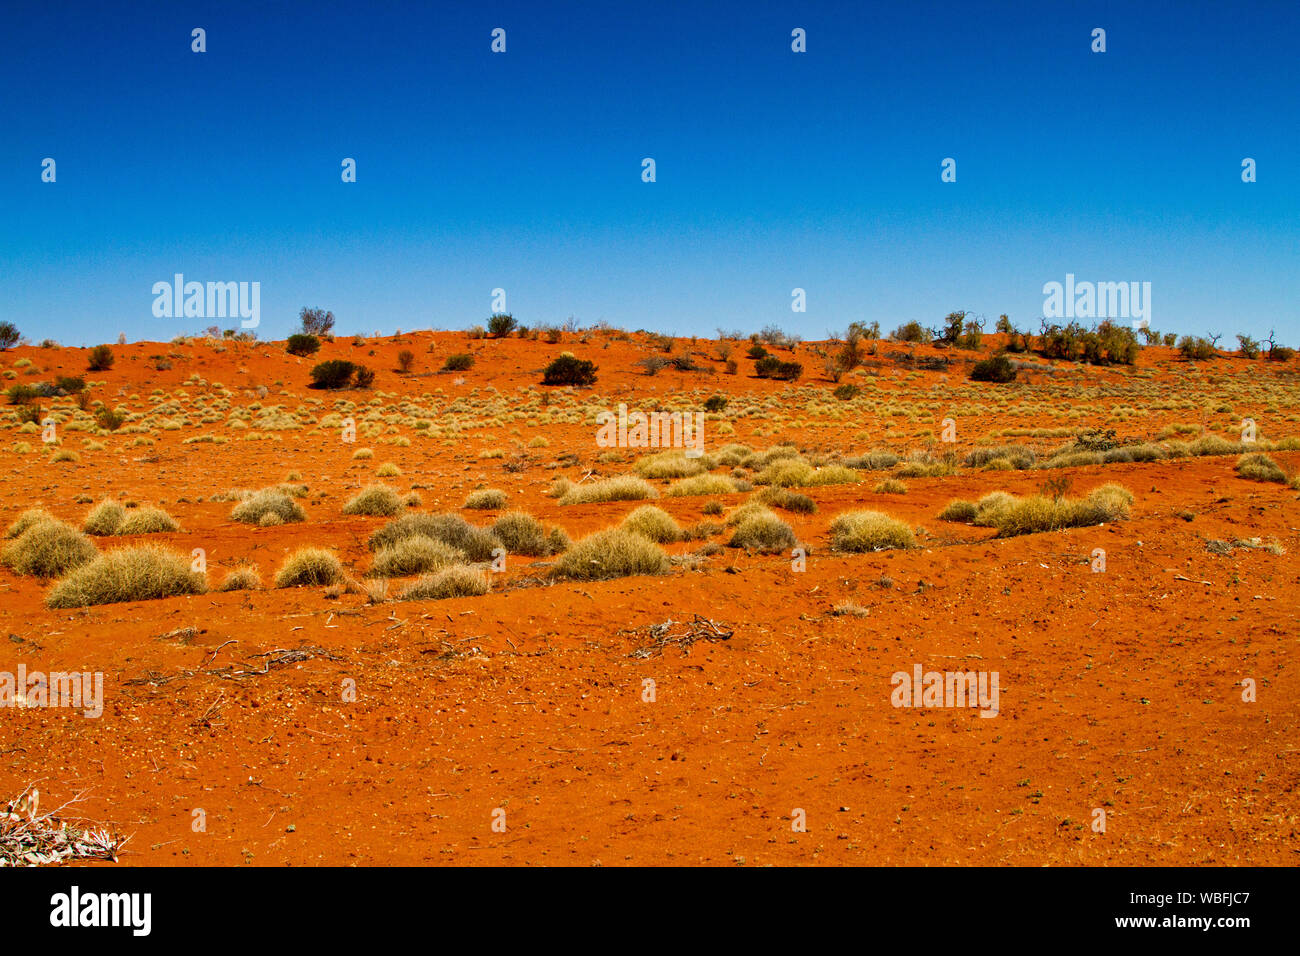 Australian outback landscape with low red sand dunes daubed with tufts of spinifex grass under blue sky during drought Stock Photo